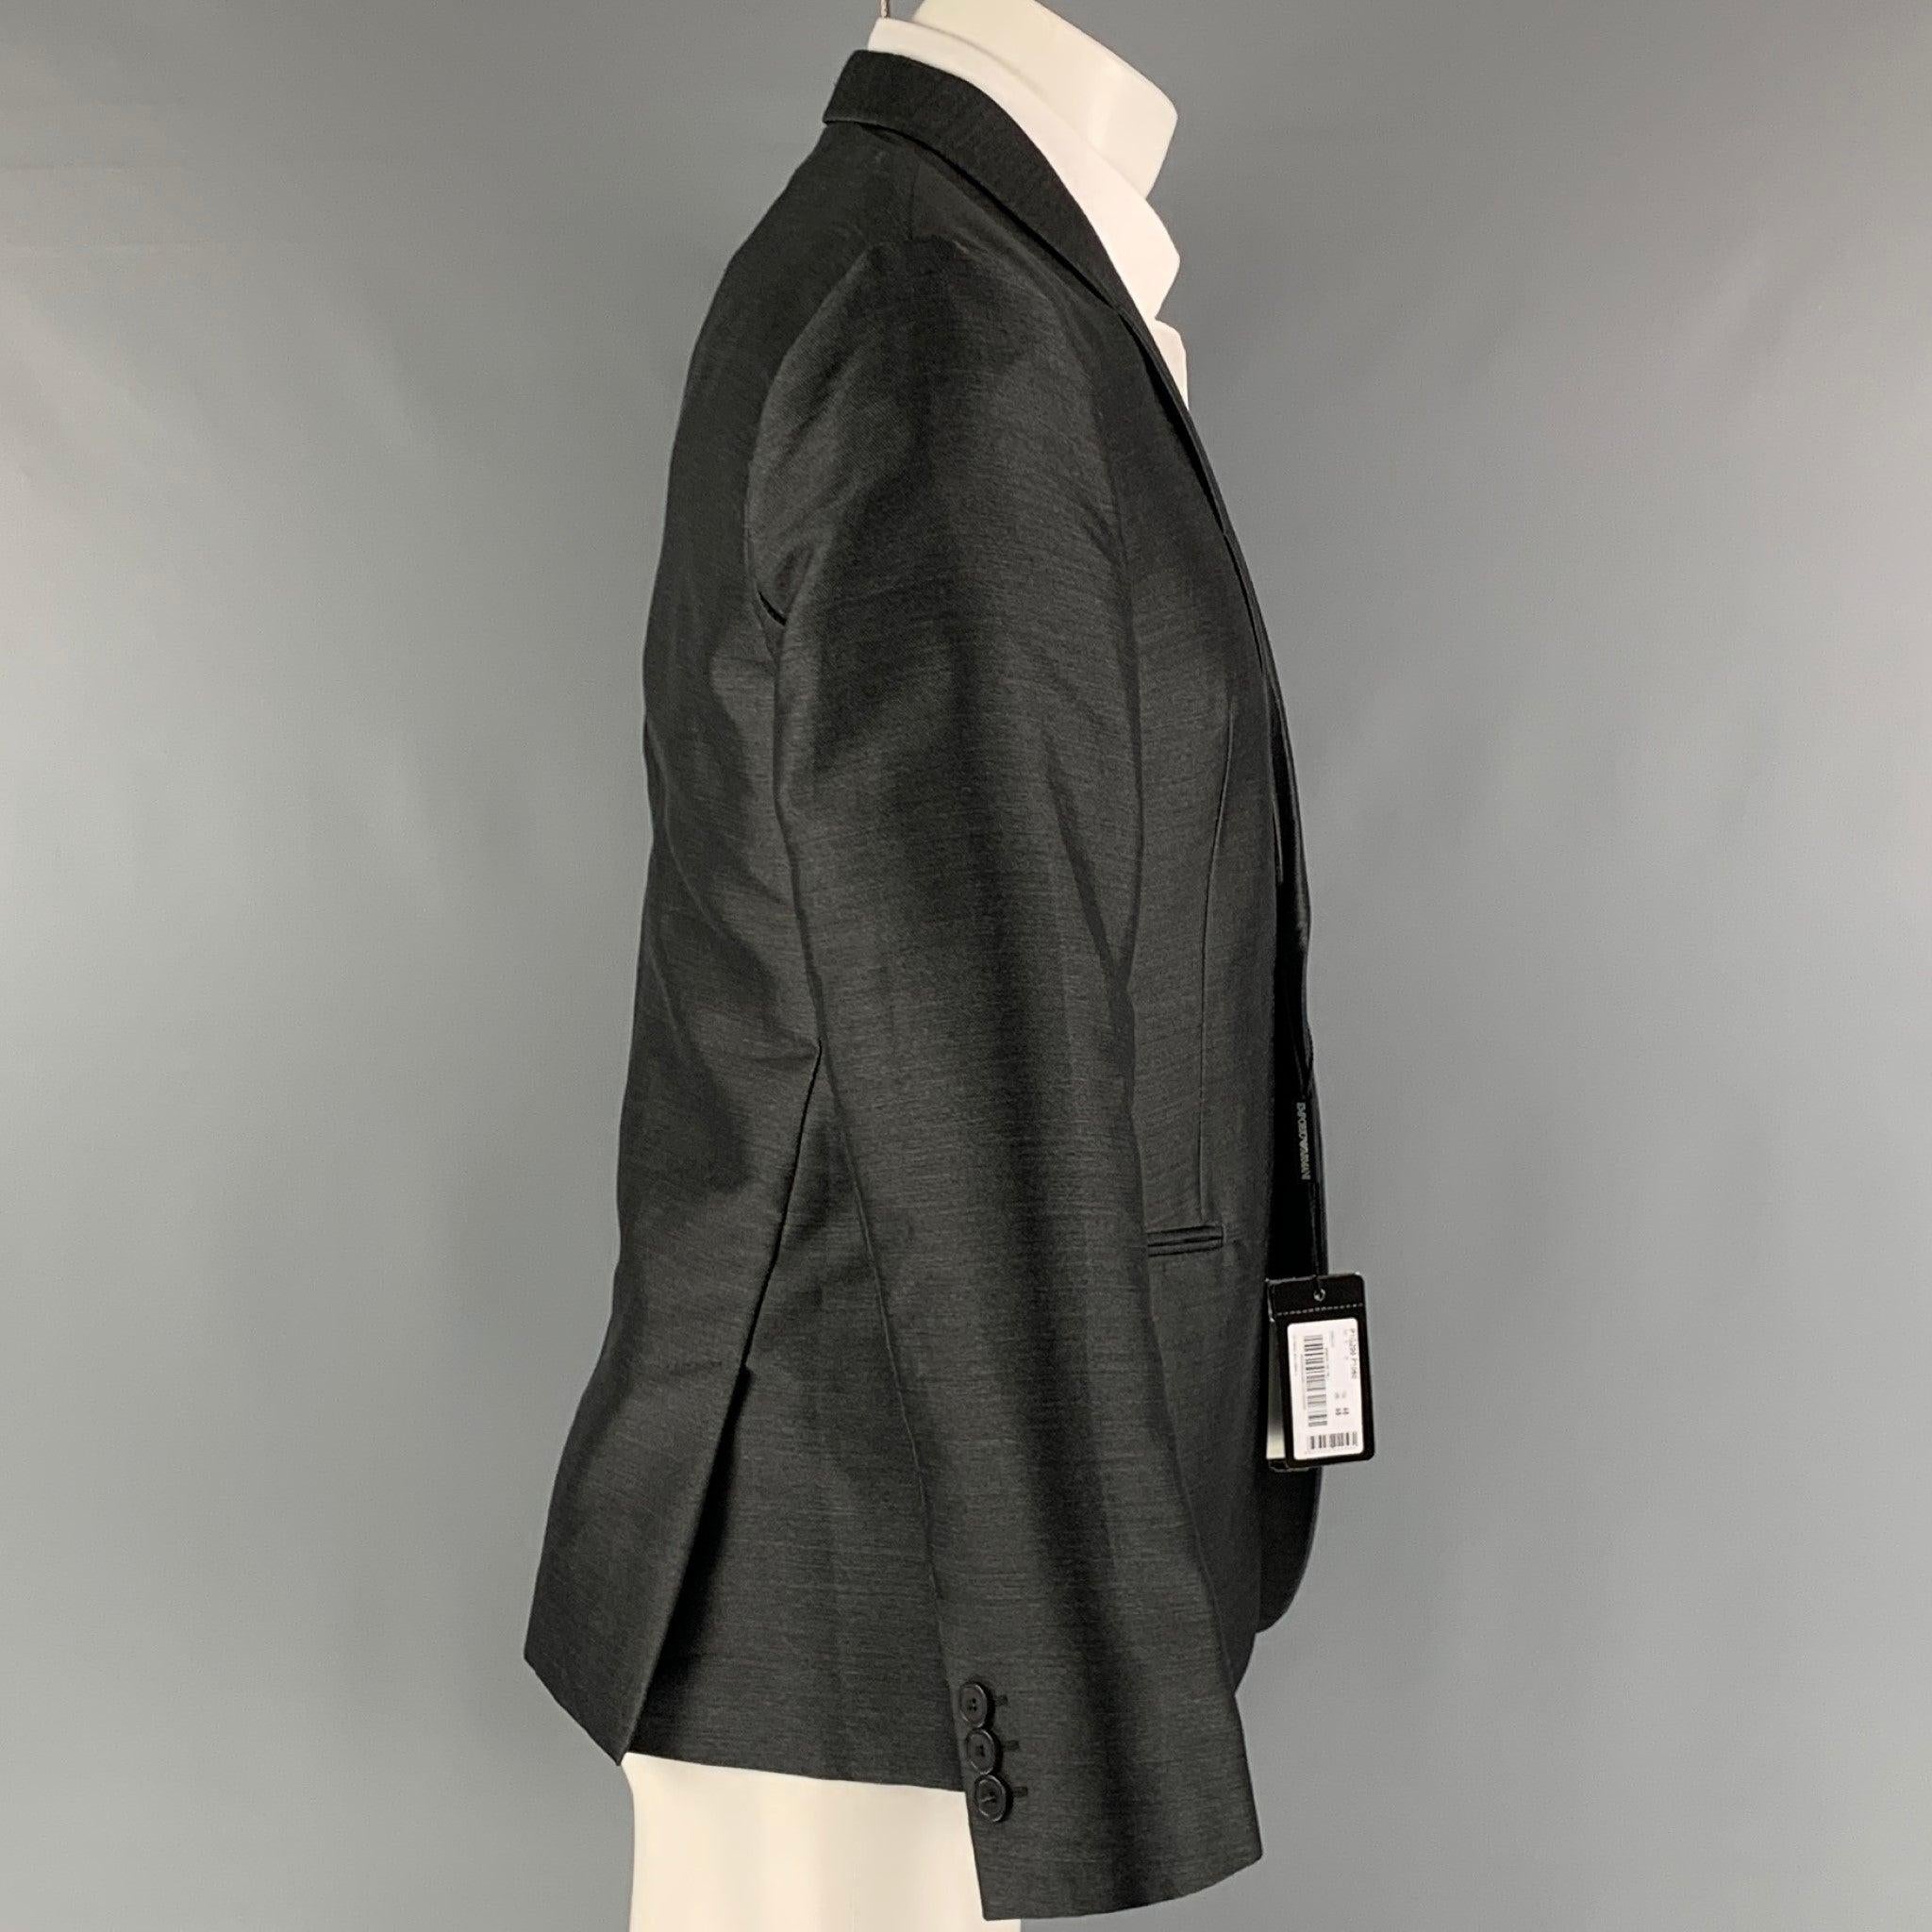 EMPORIO ARMANI sport coat comes in a charcoal polyester woven material with a full liner featuring a shawl collar, welt pockets, and a single button closure. Made in Italy. New with Tags. 

Marked:   48 

Measurements: 
 
Shoulder: 16.5 inches